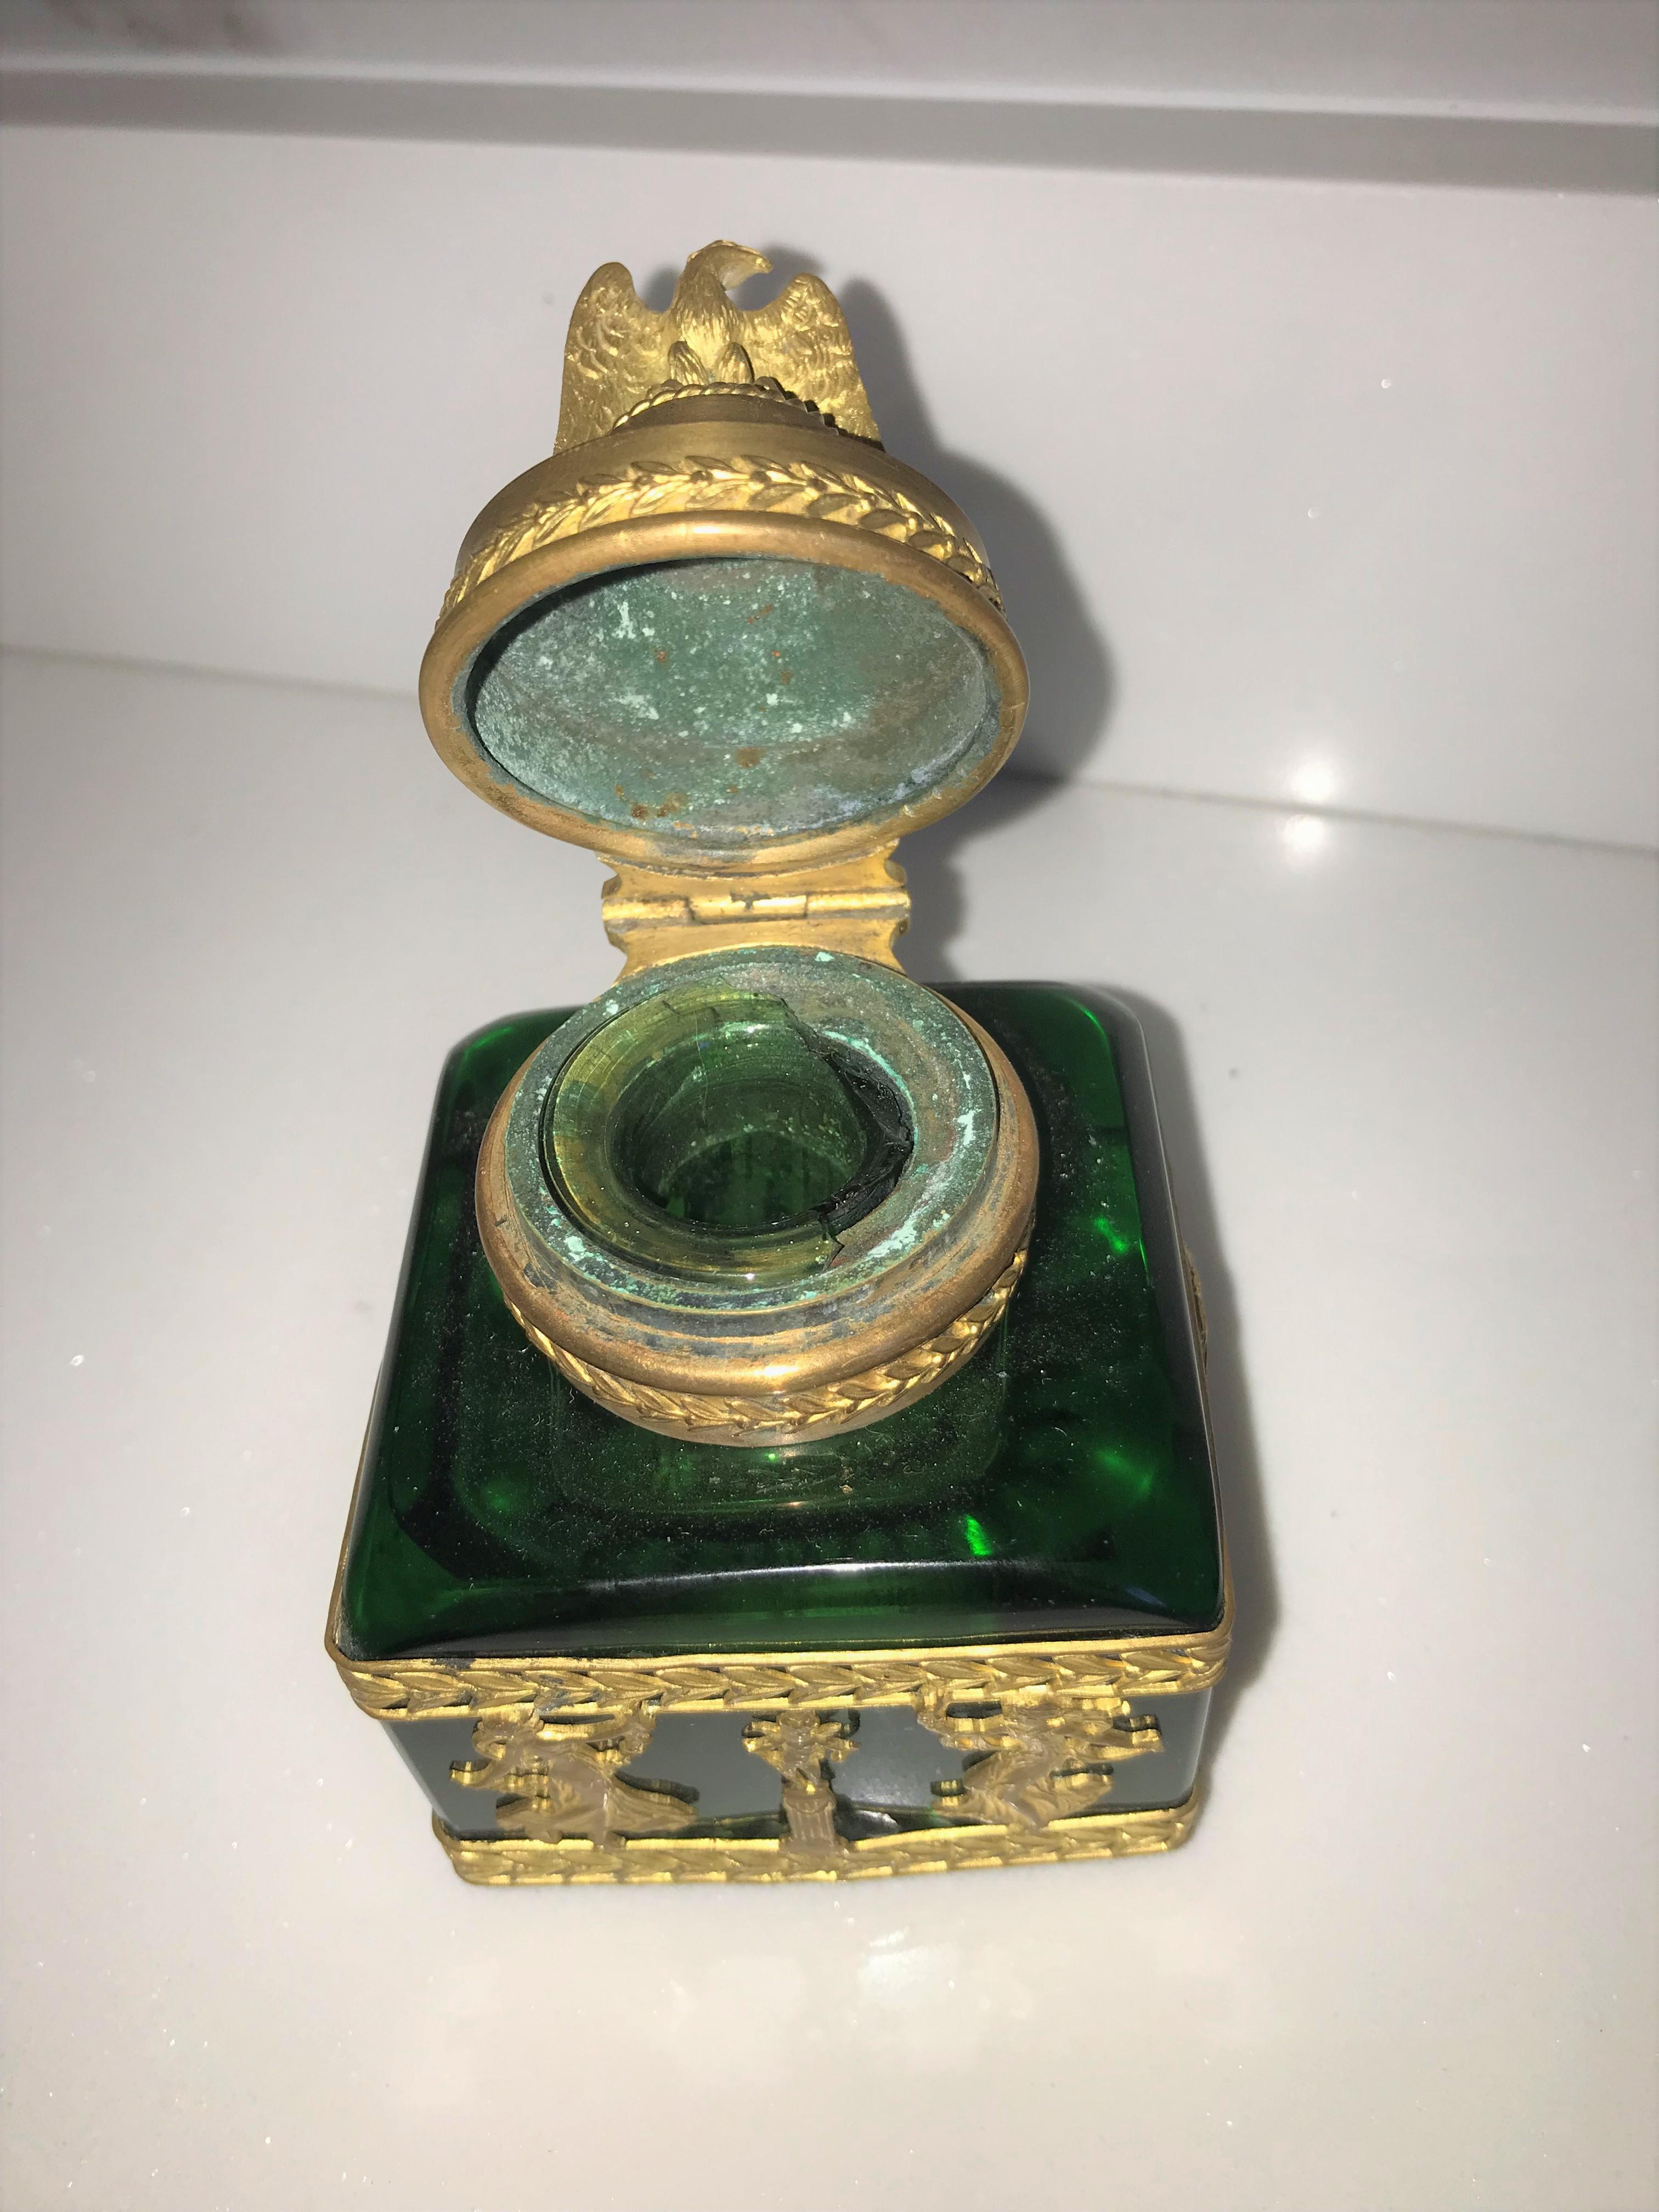 Empire Revival Grand Tour French Empire Green Glass Ormolu Mounted Inkwell